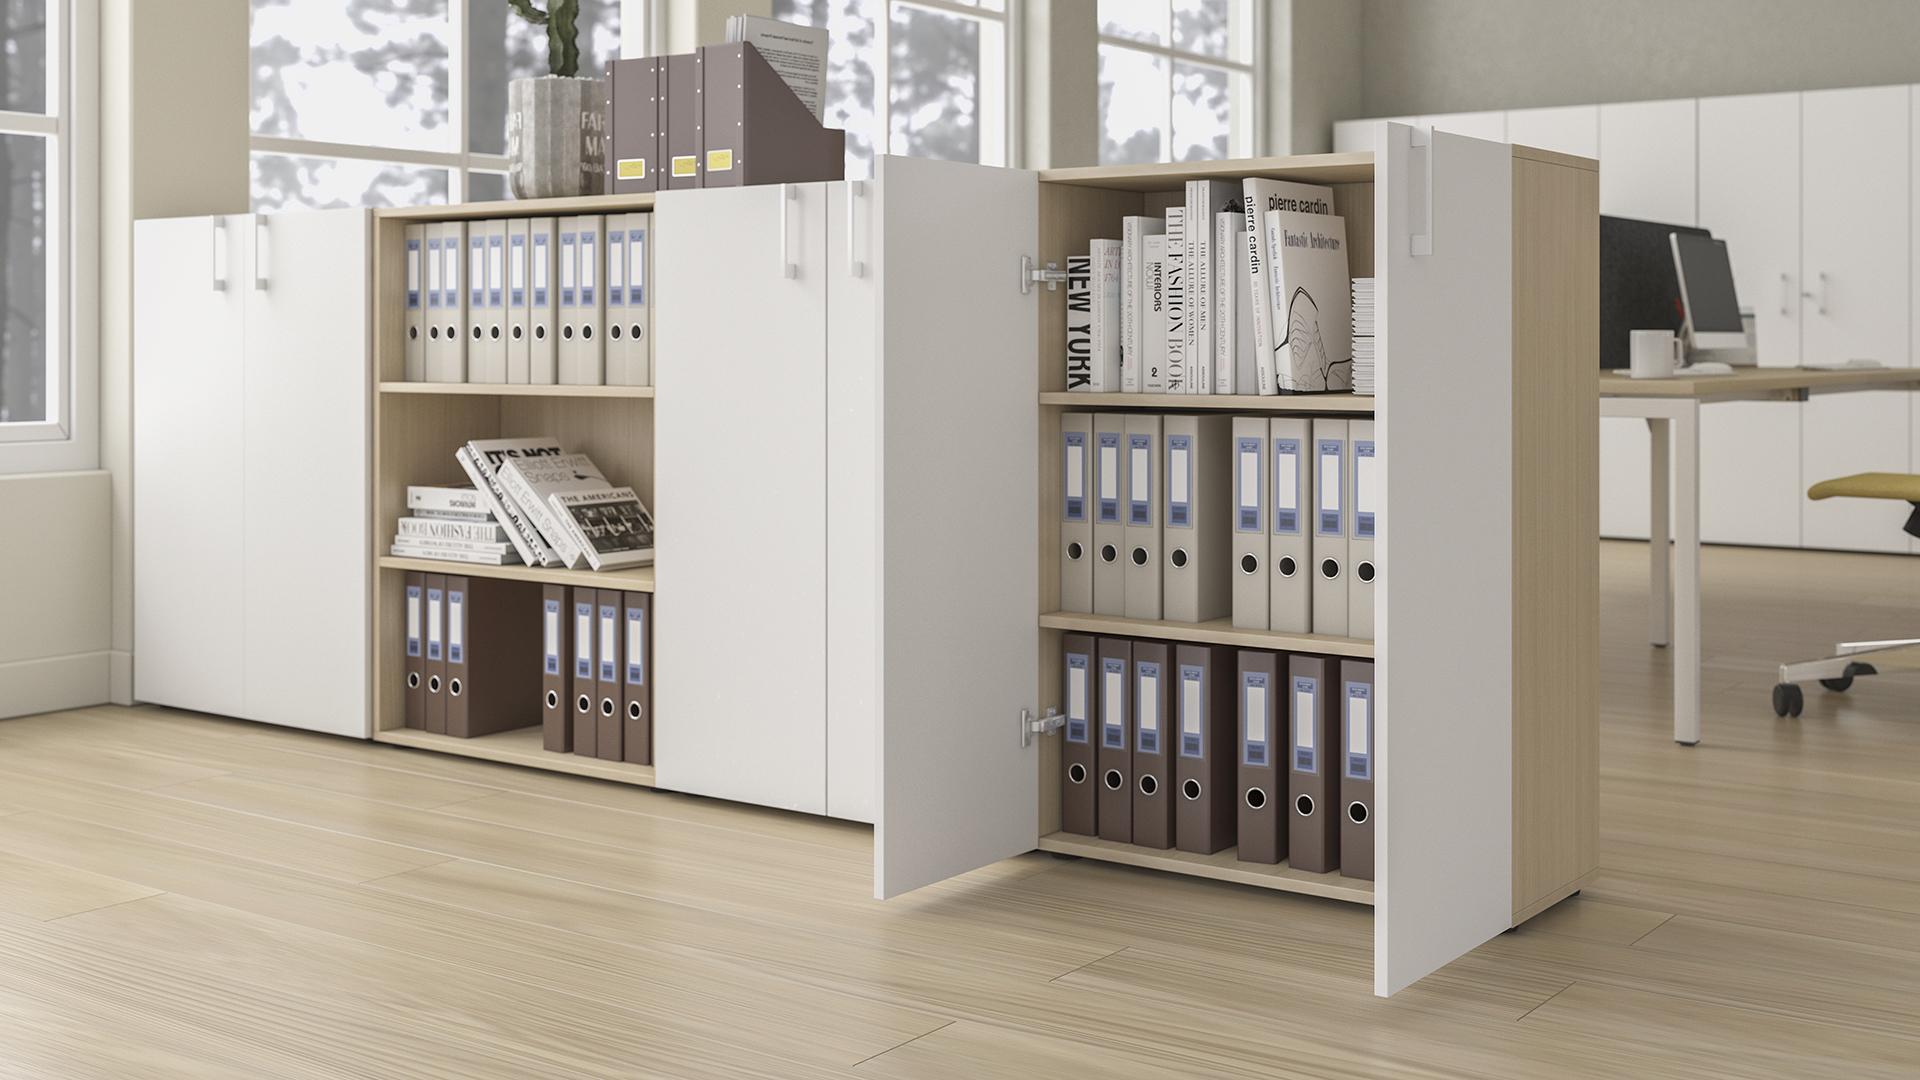 The Nova storage range offers cabinets, cupboards and shelves at various heights